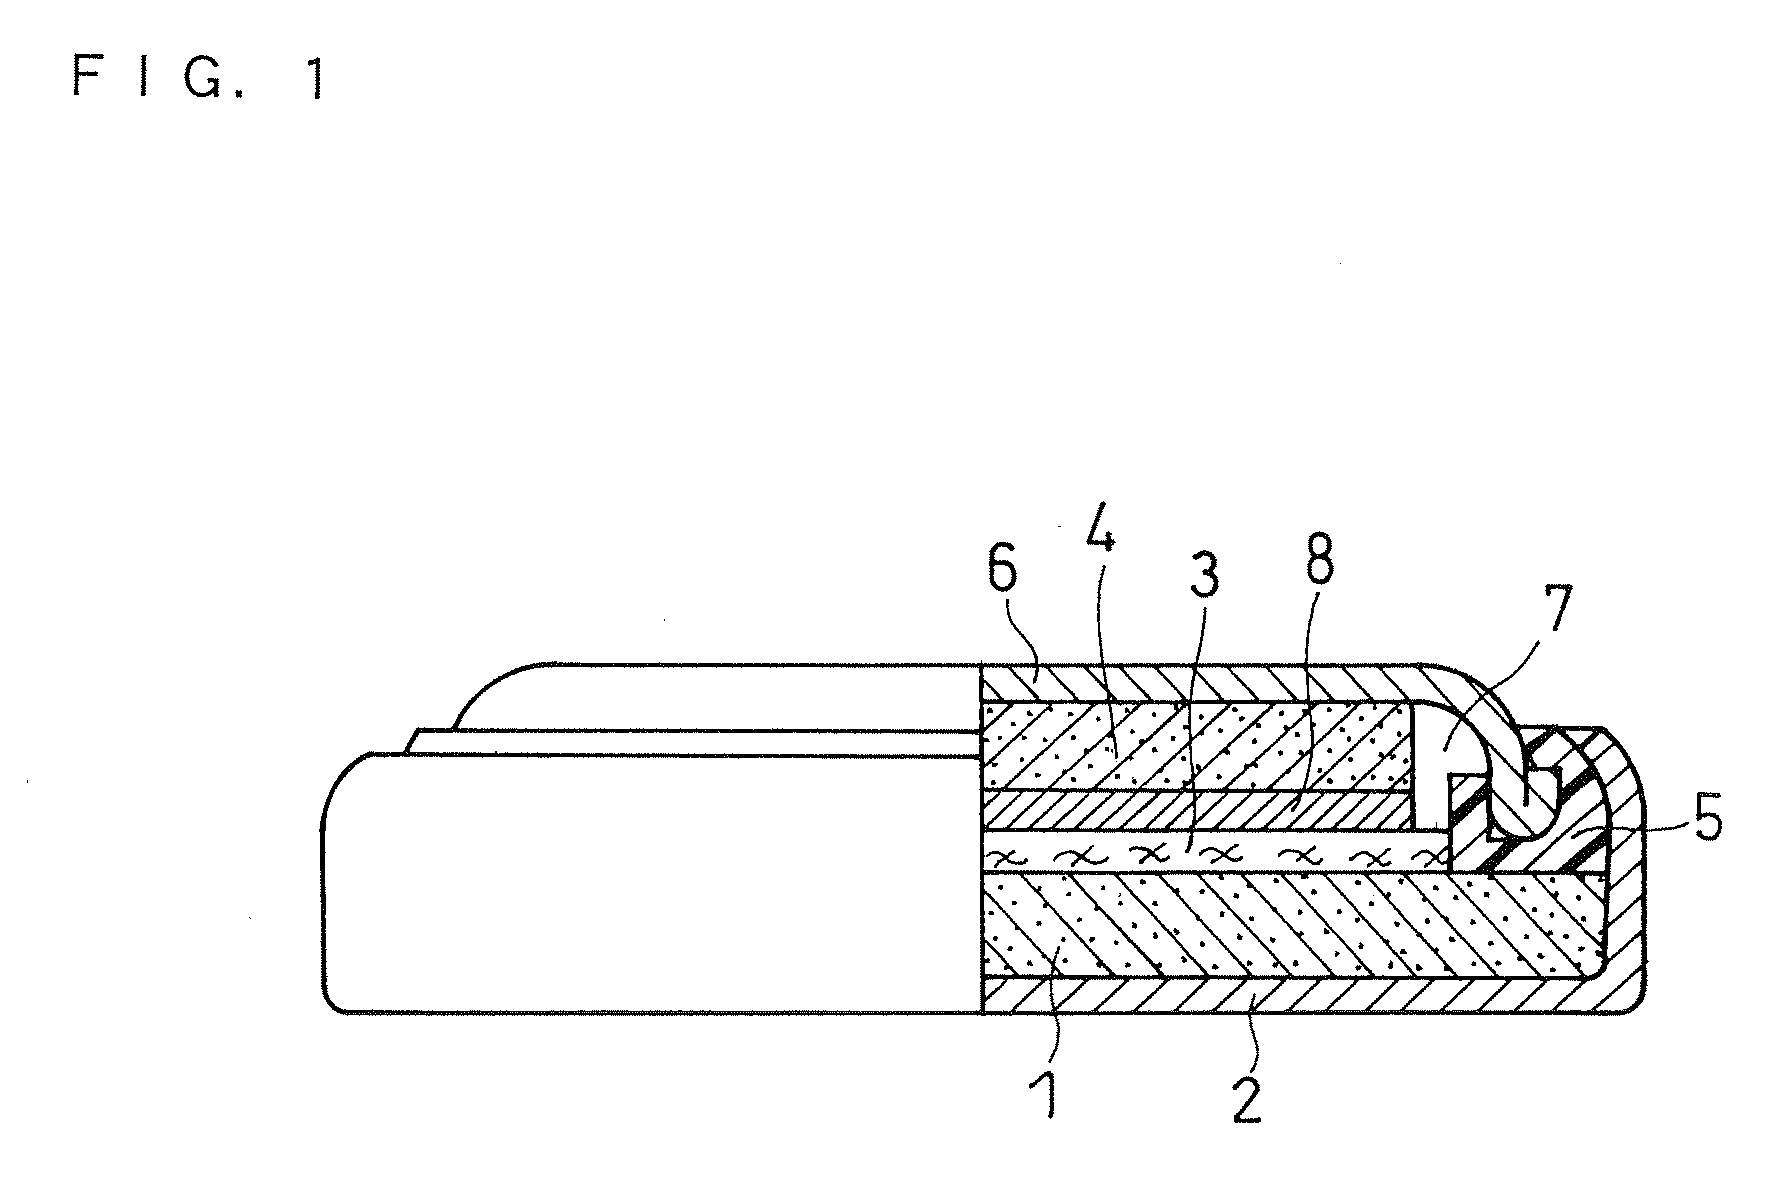 Negative electrode and non-aqueous electrolyte secondary battery using the same